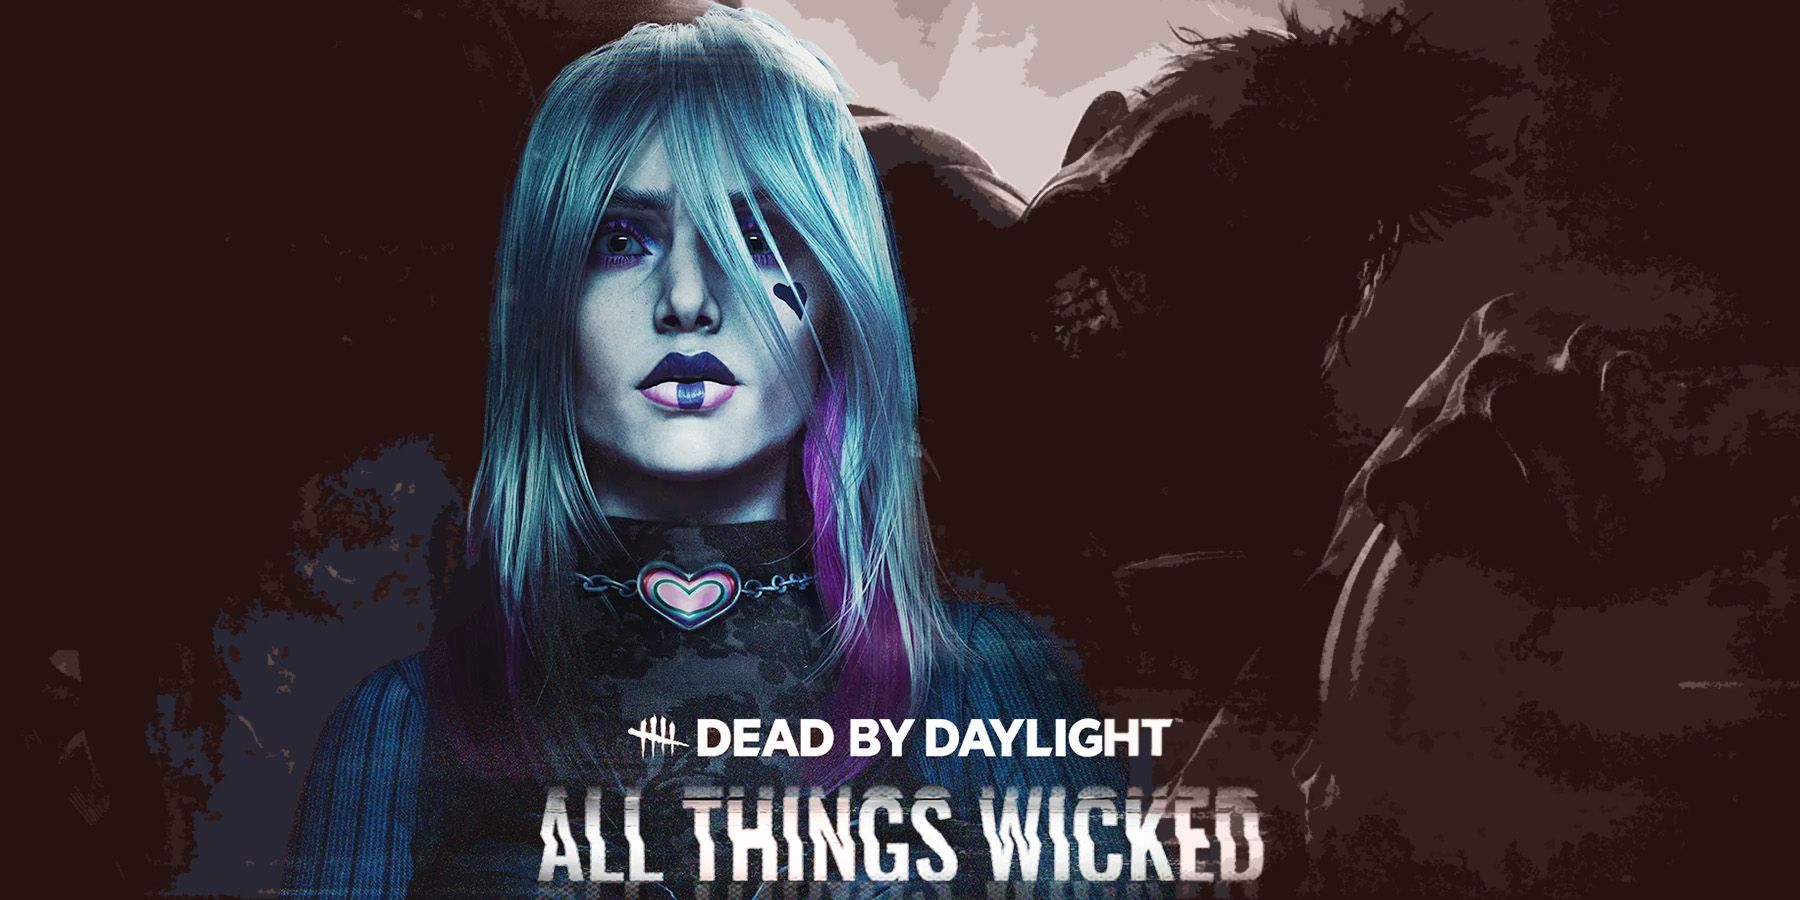 Dead by Daylight All Things Wicked chapter key art posterized